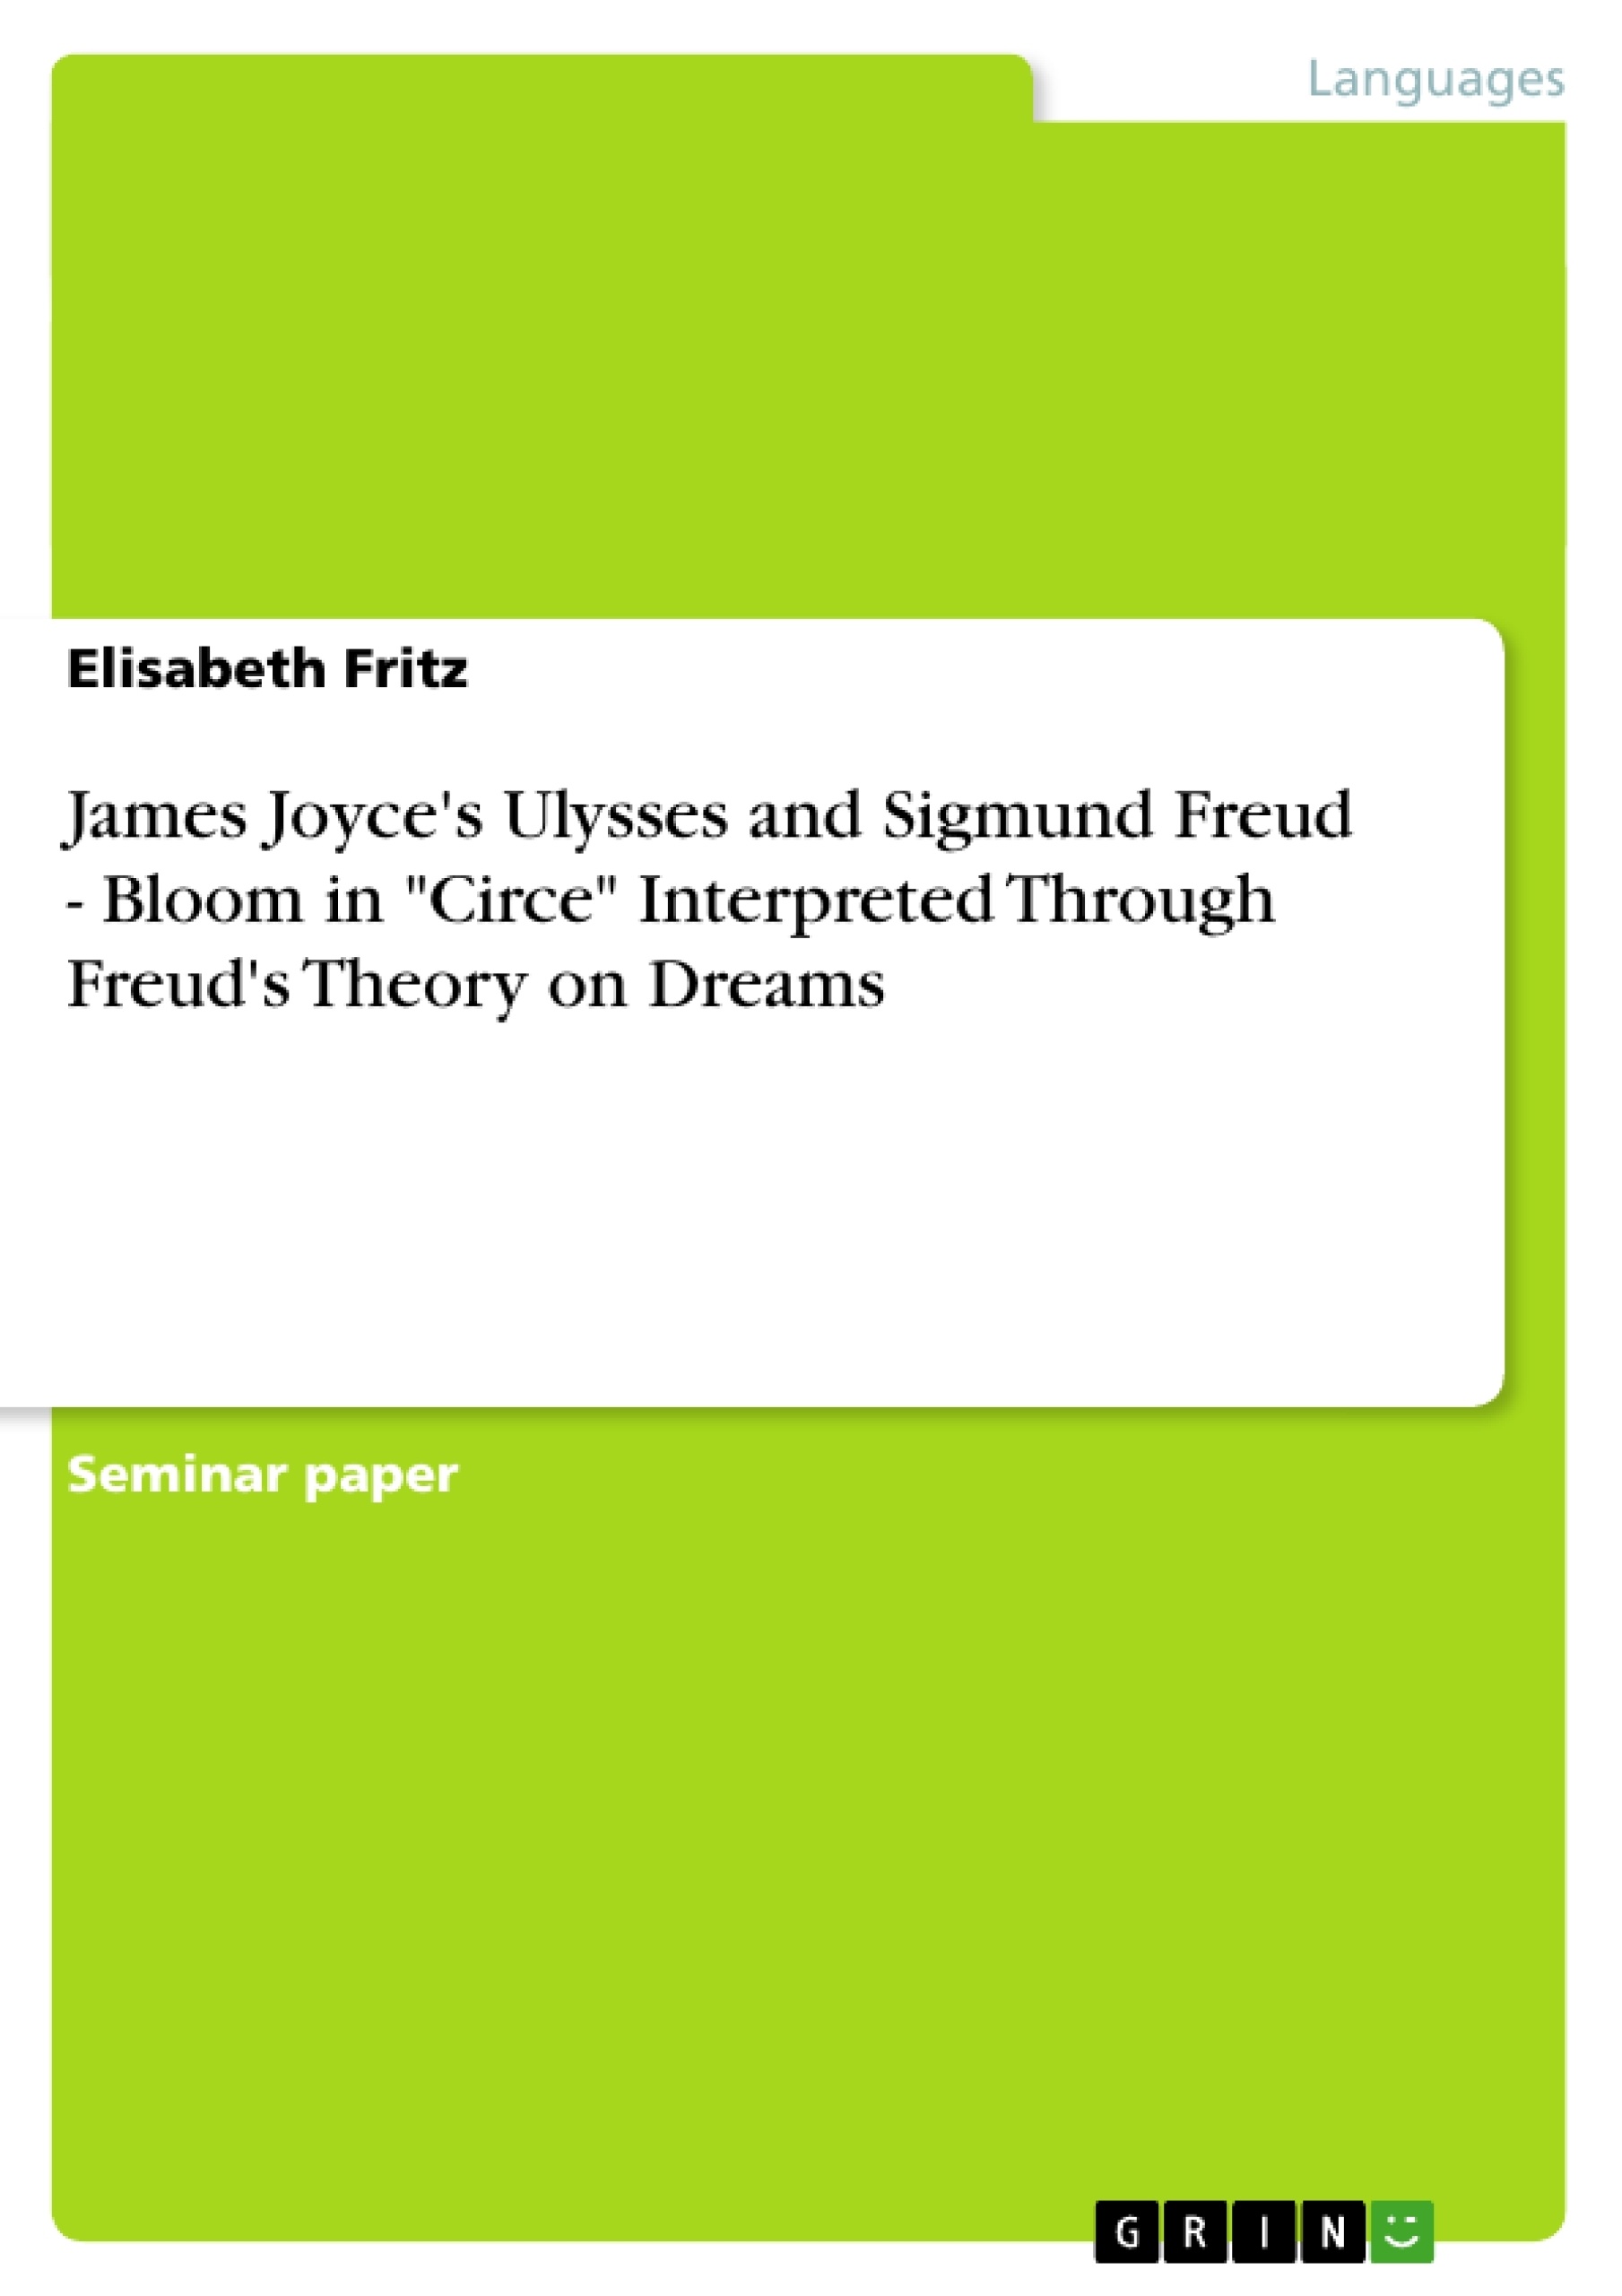 Titre: James Joyce's Ulysses and Sigmund Freud - Bloom in "Circe" Interpreted Through Freud's Theory on Dreams